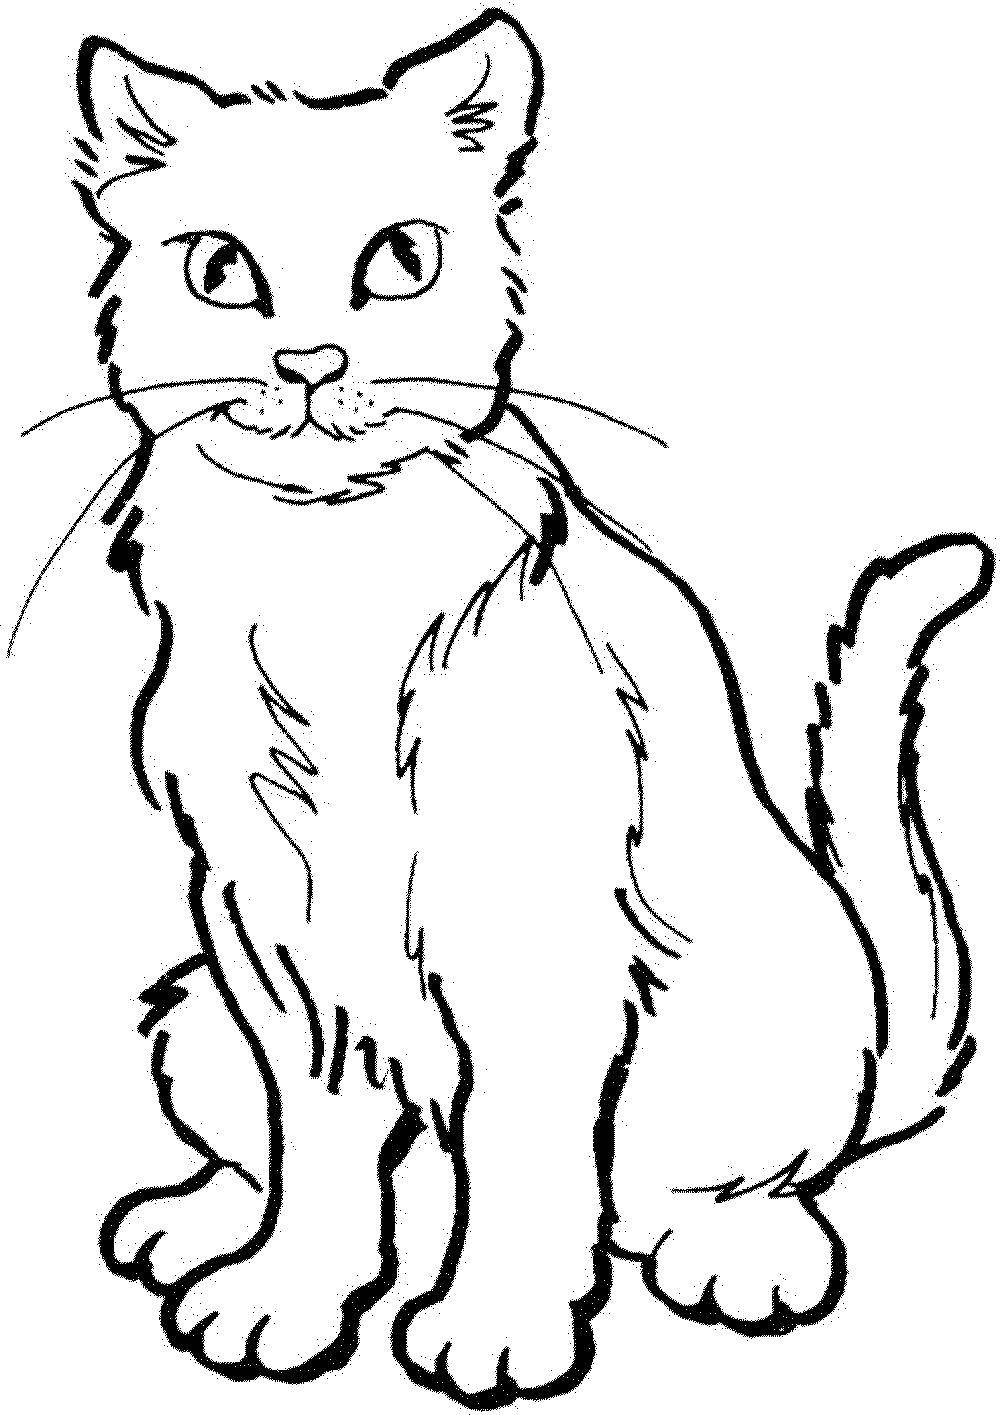 Coloring Cat. Category Cats and kittens. Tags:  animals, kitten, cat, cat.